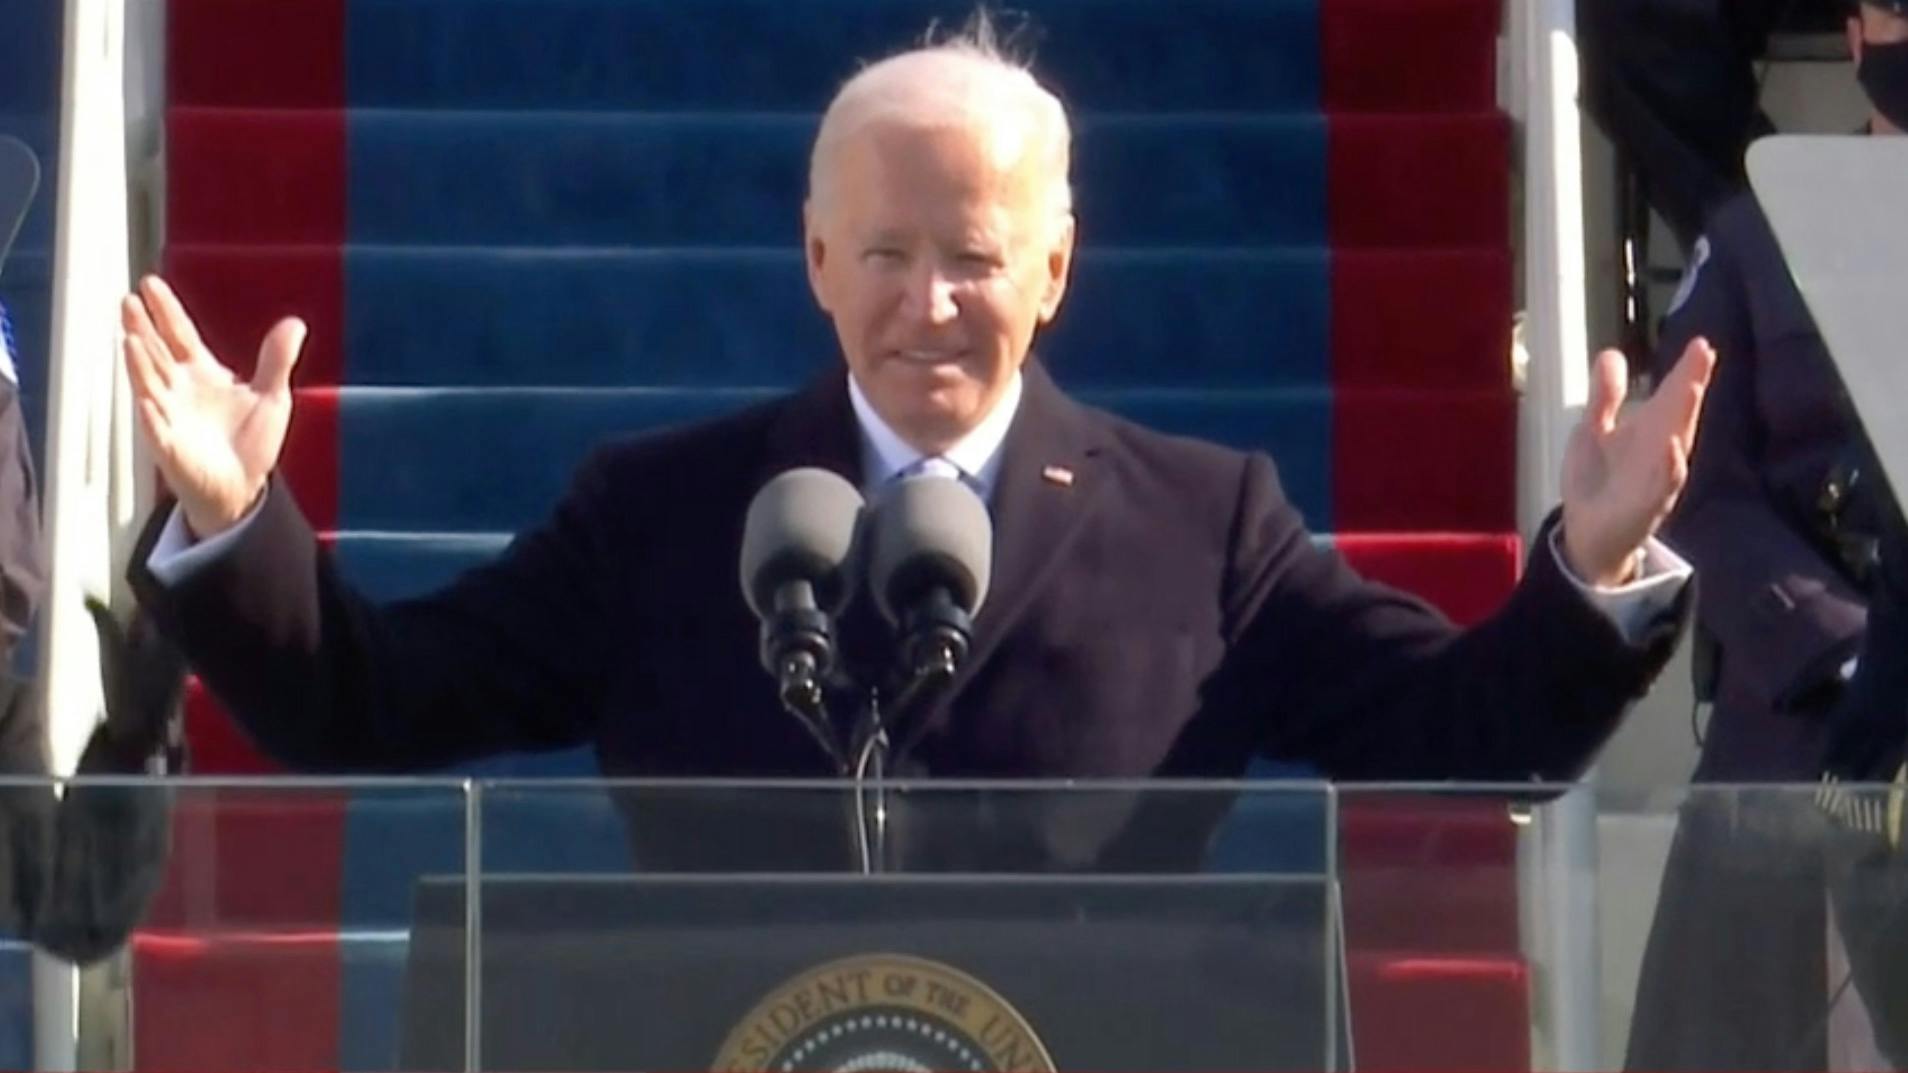 “Now we can finally make America great again”: Rock reacts to the inauguration of Joe Biden